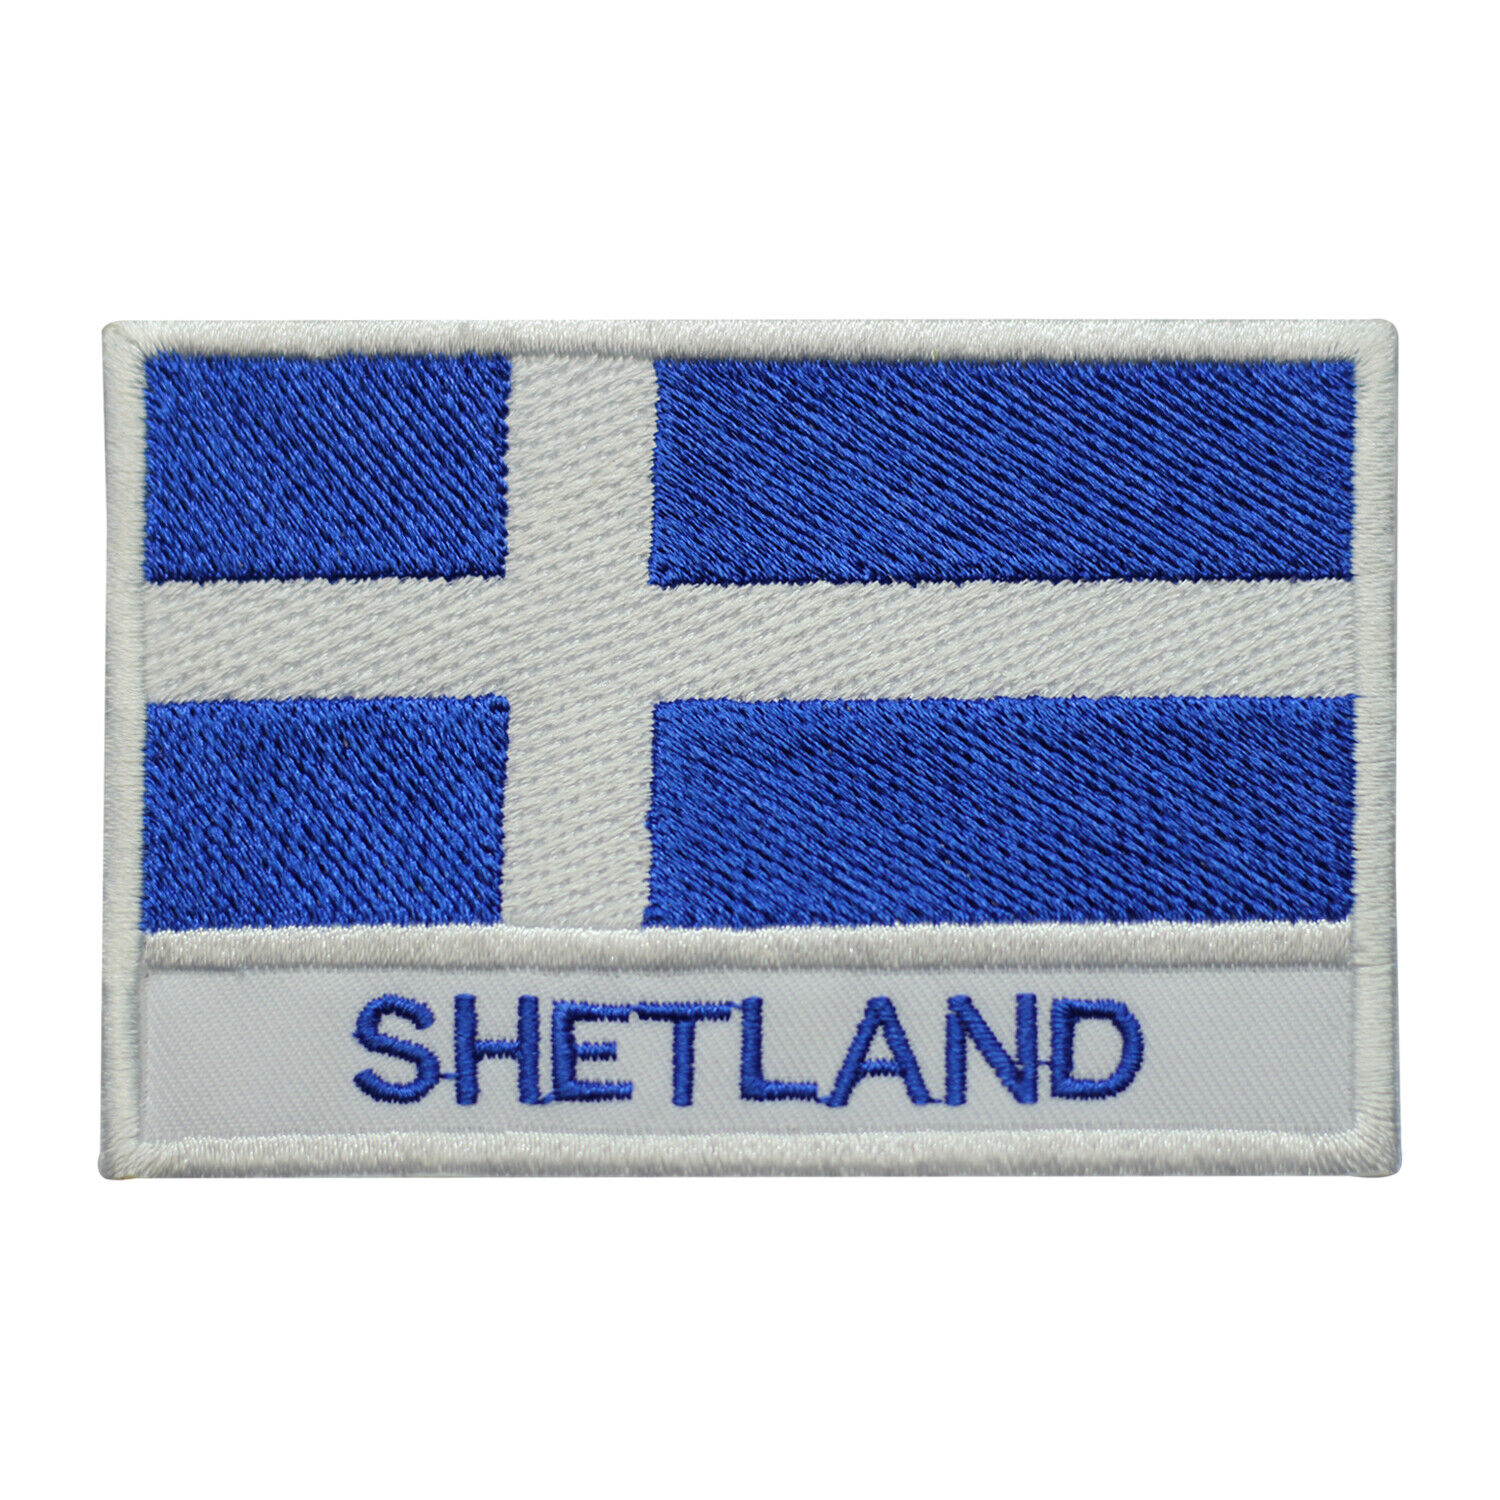 Shetland County Flag Patch Iron On Patch Sew On Badge Embroidered Patch